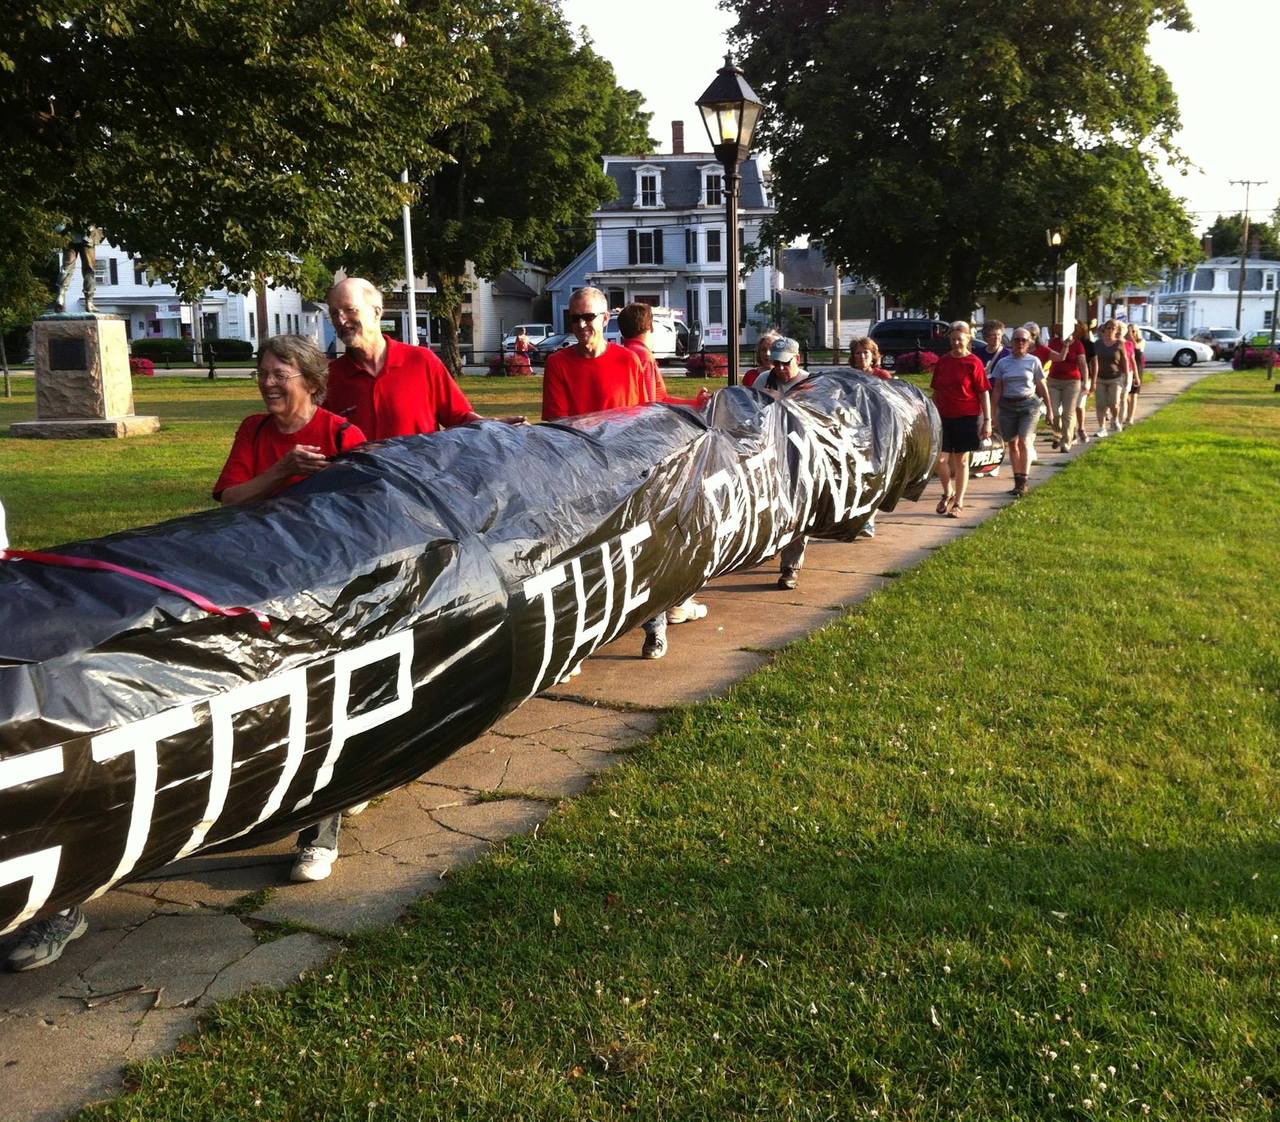 Kinder Morgan Tennessee Gas Pipeline “Rolling Rally” protesters with “The Pipe” arrives at Townsend Common, MA, July 21. The rally will end on the steps of the MA State House on July 30, 2014.